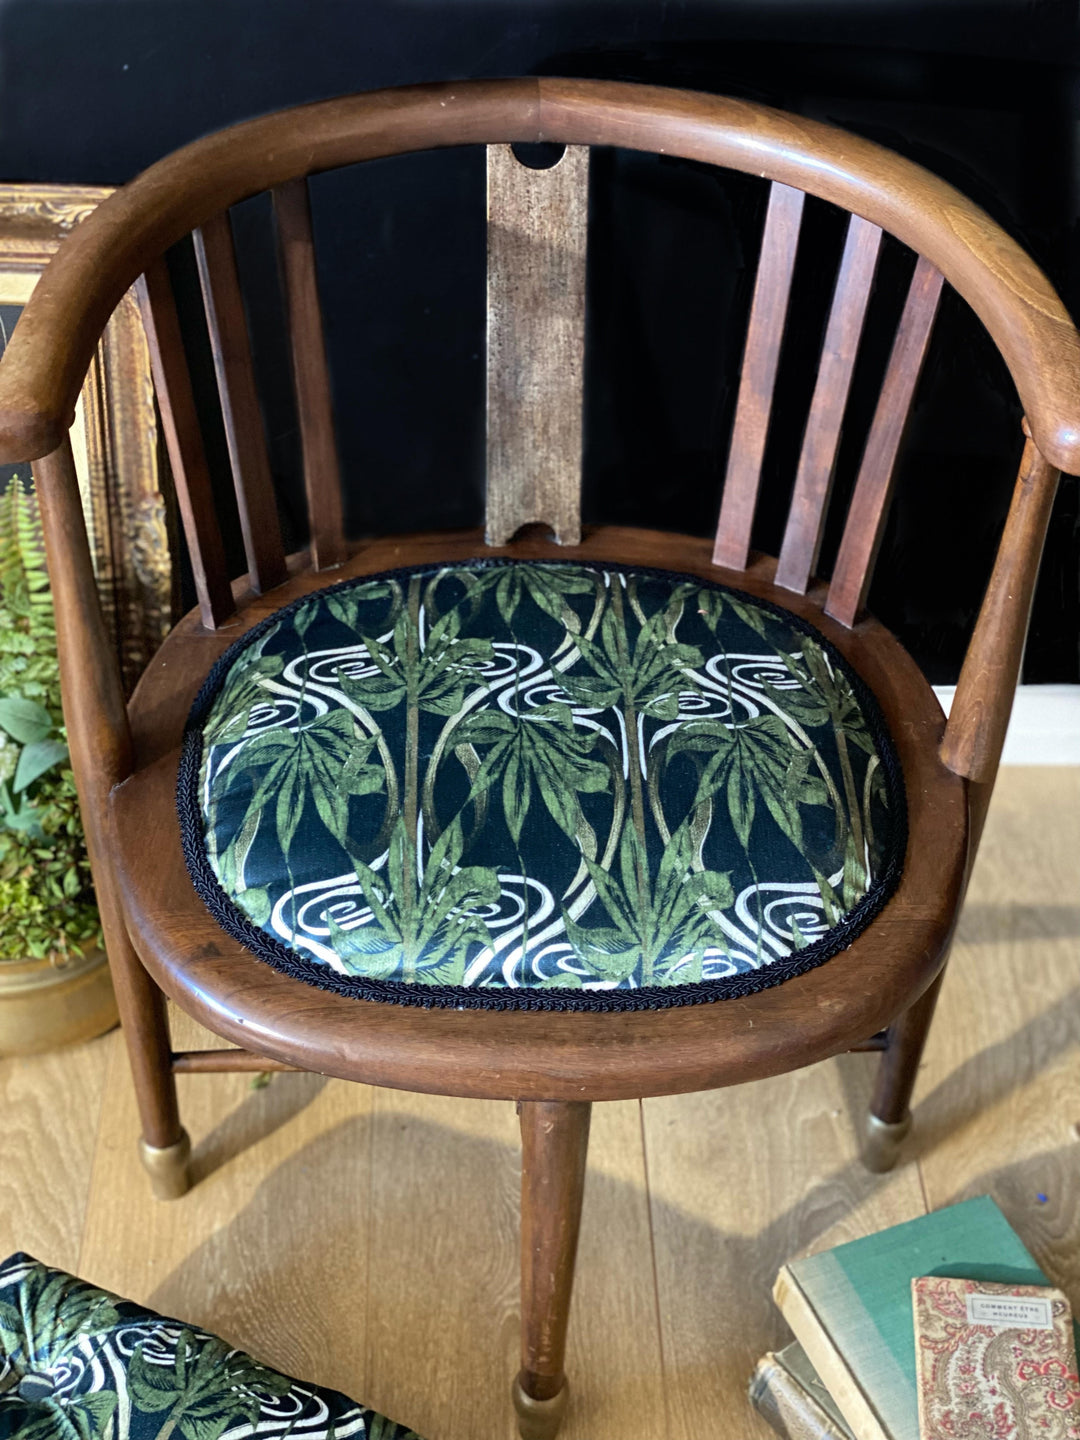 Scottish Chair and Footstool with Velvet upholstery